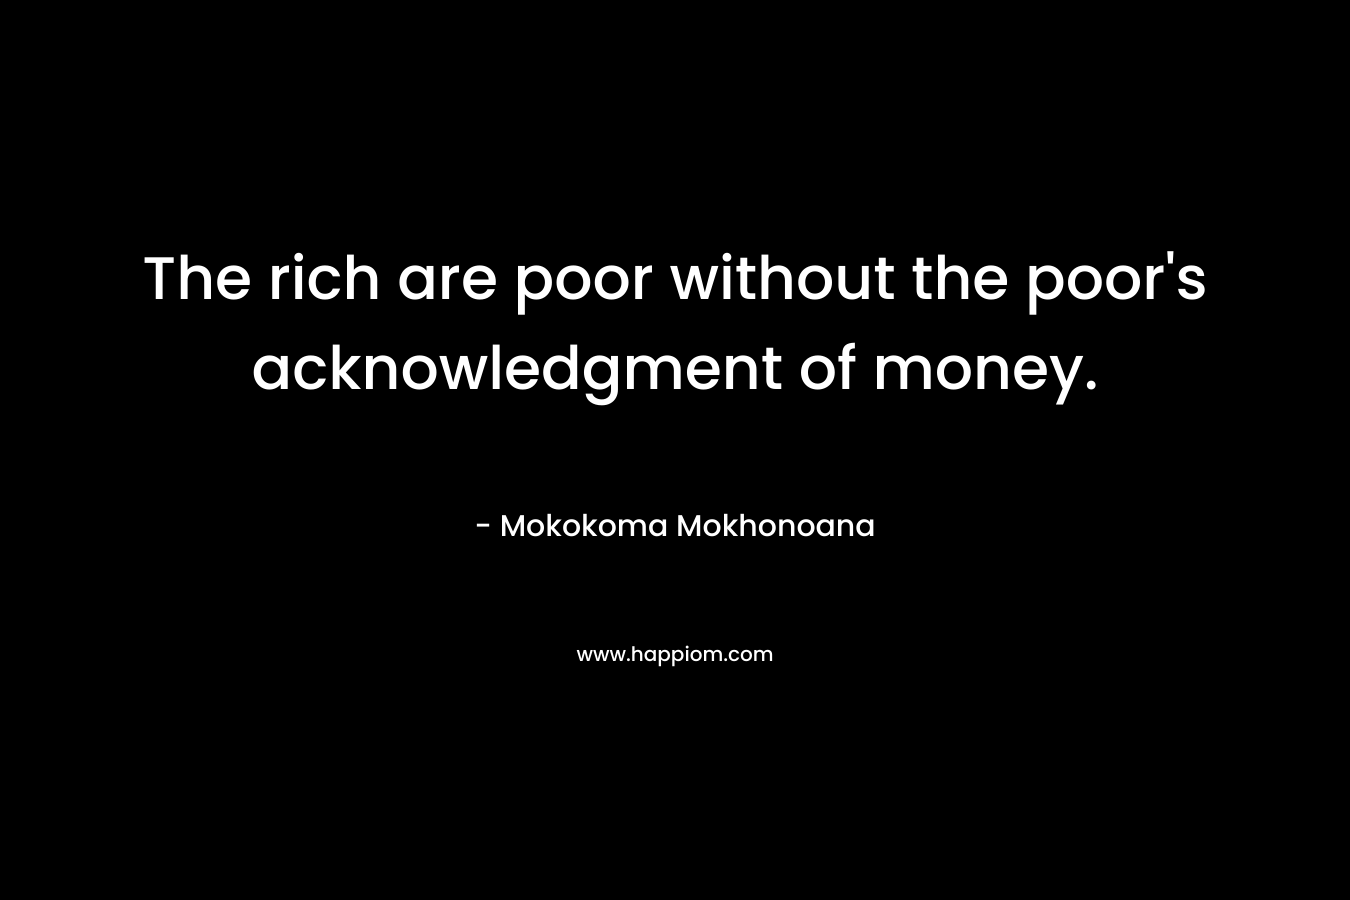 The rich are poor without the poor’s acknowledgment of money. – Mokokoma Mokhonoana